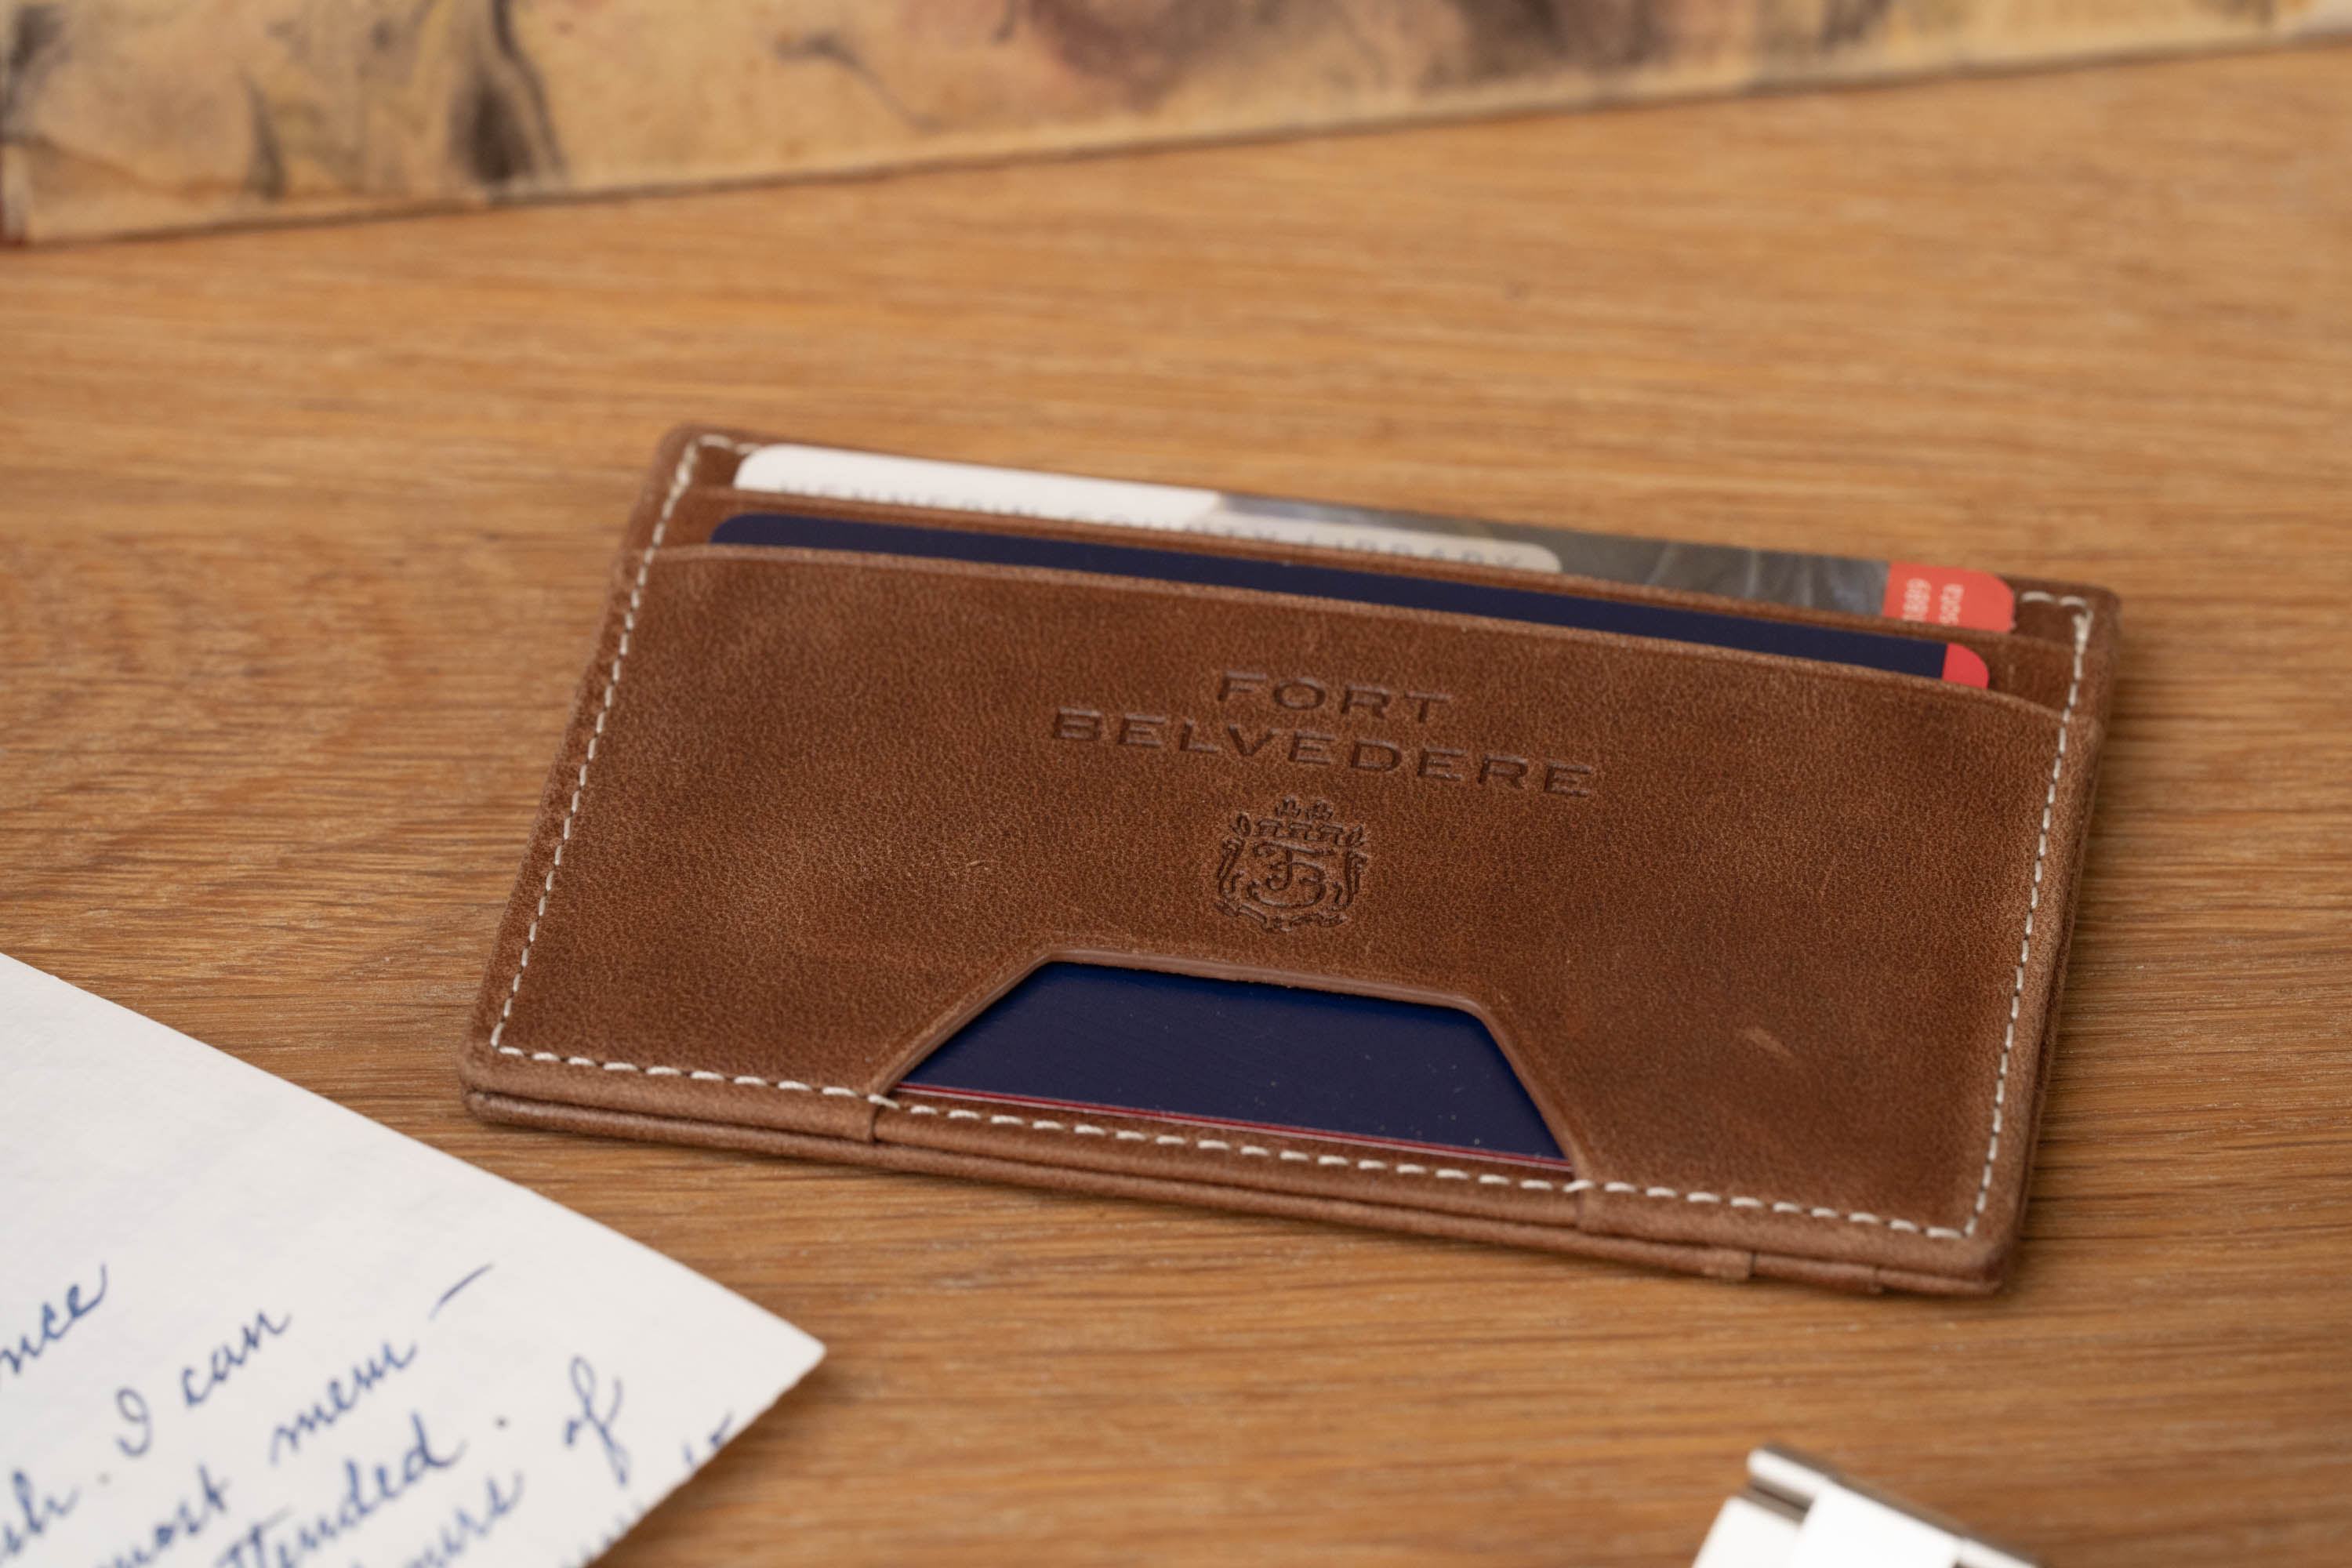 Four Card Carrier Slim Wallet in Saddle Brown Montecristo Leather has warm dye. 